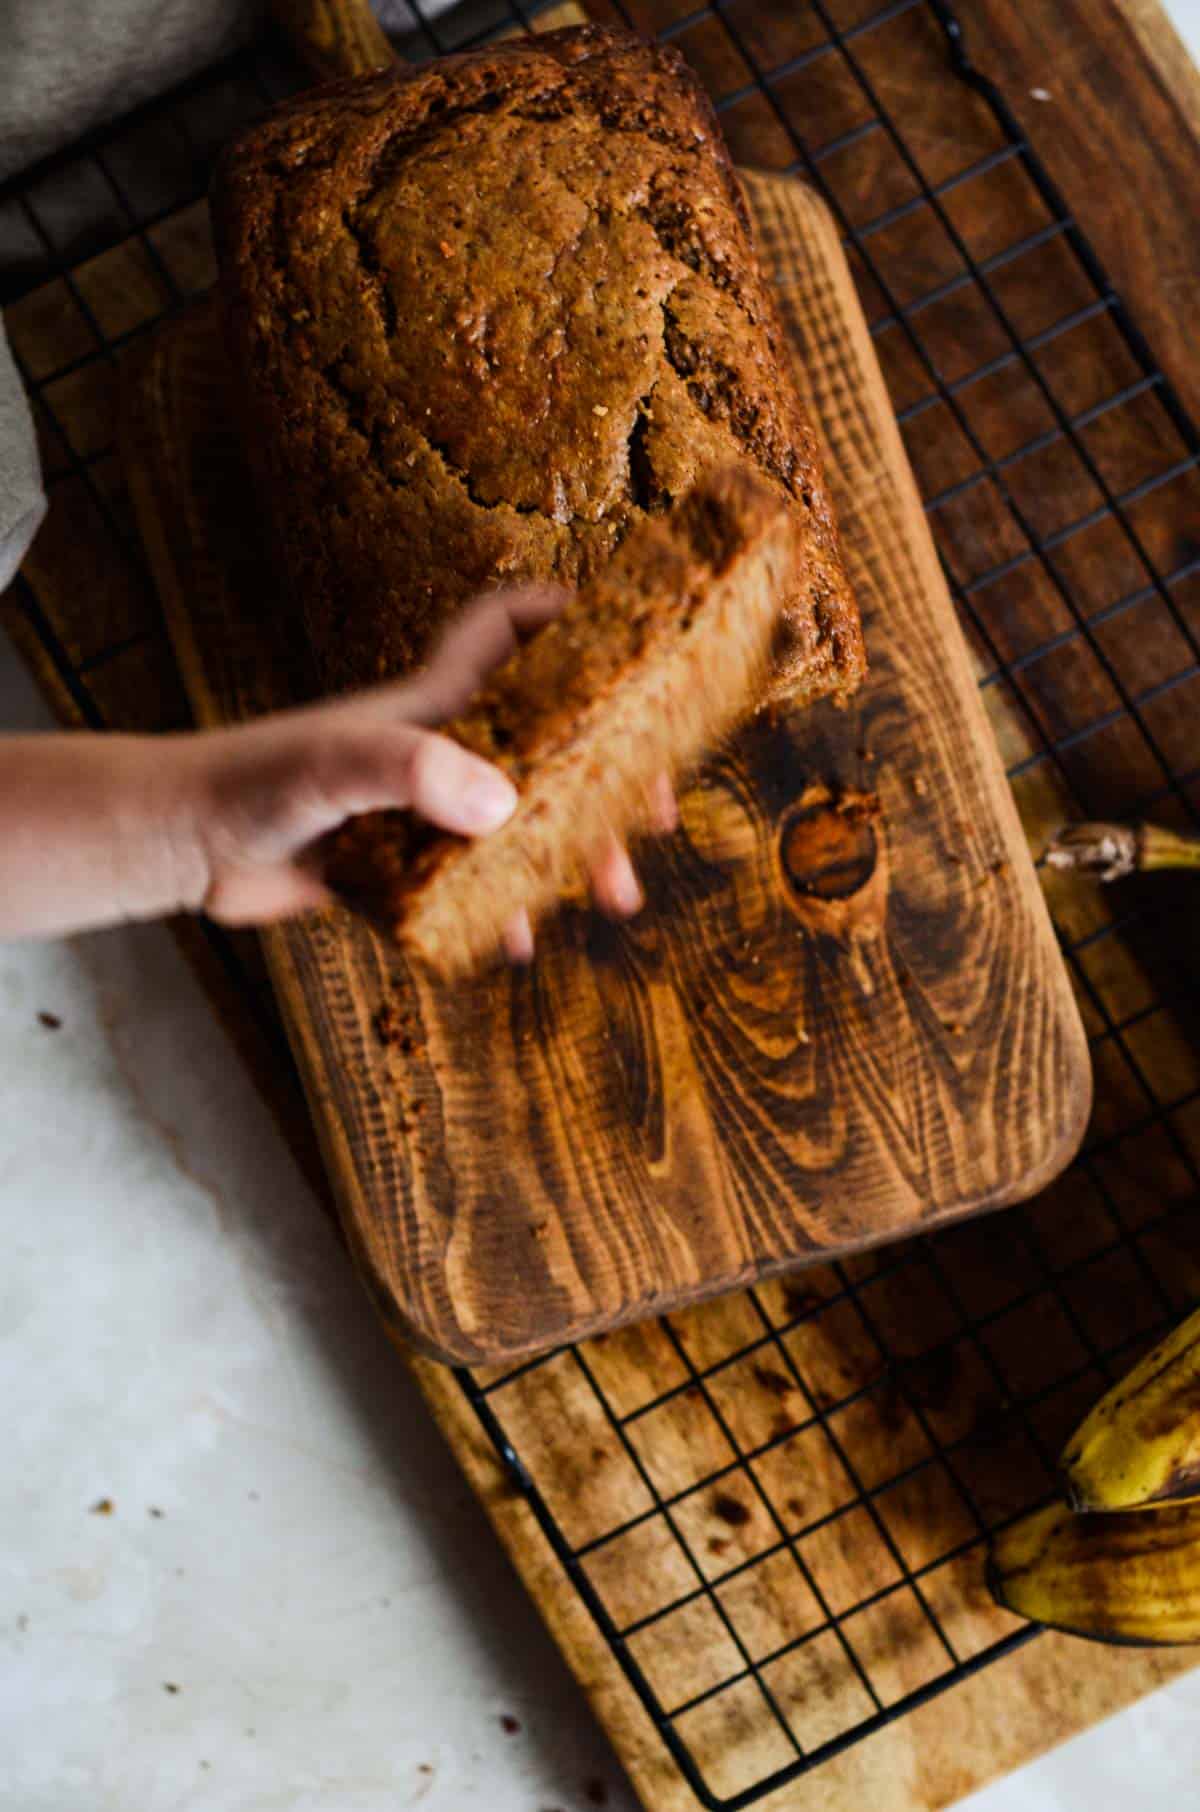 A piece of banana bread being grabbed by a toddler hand.